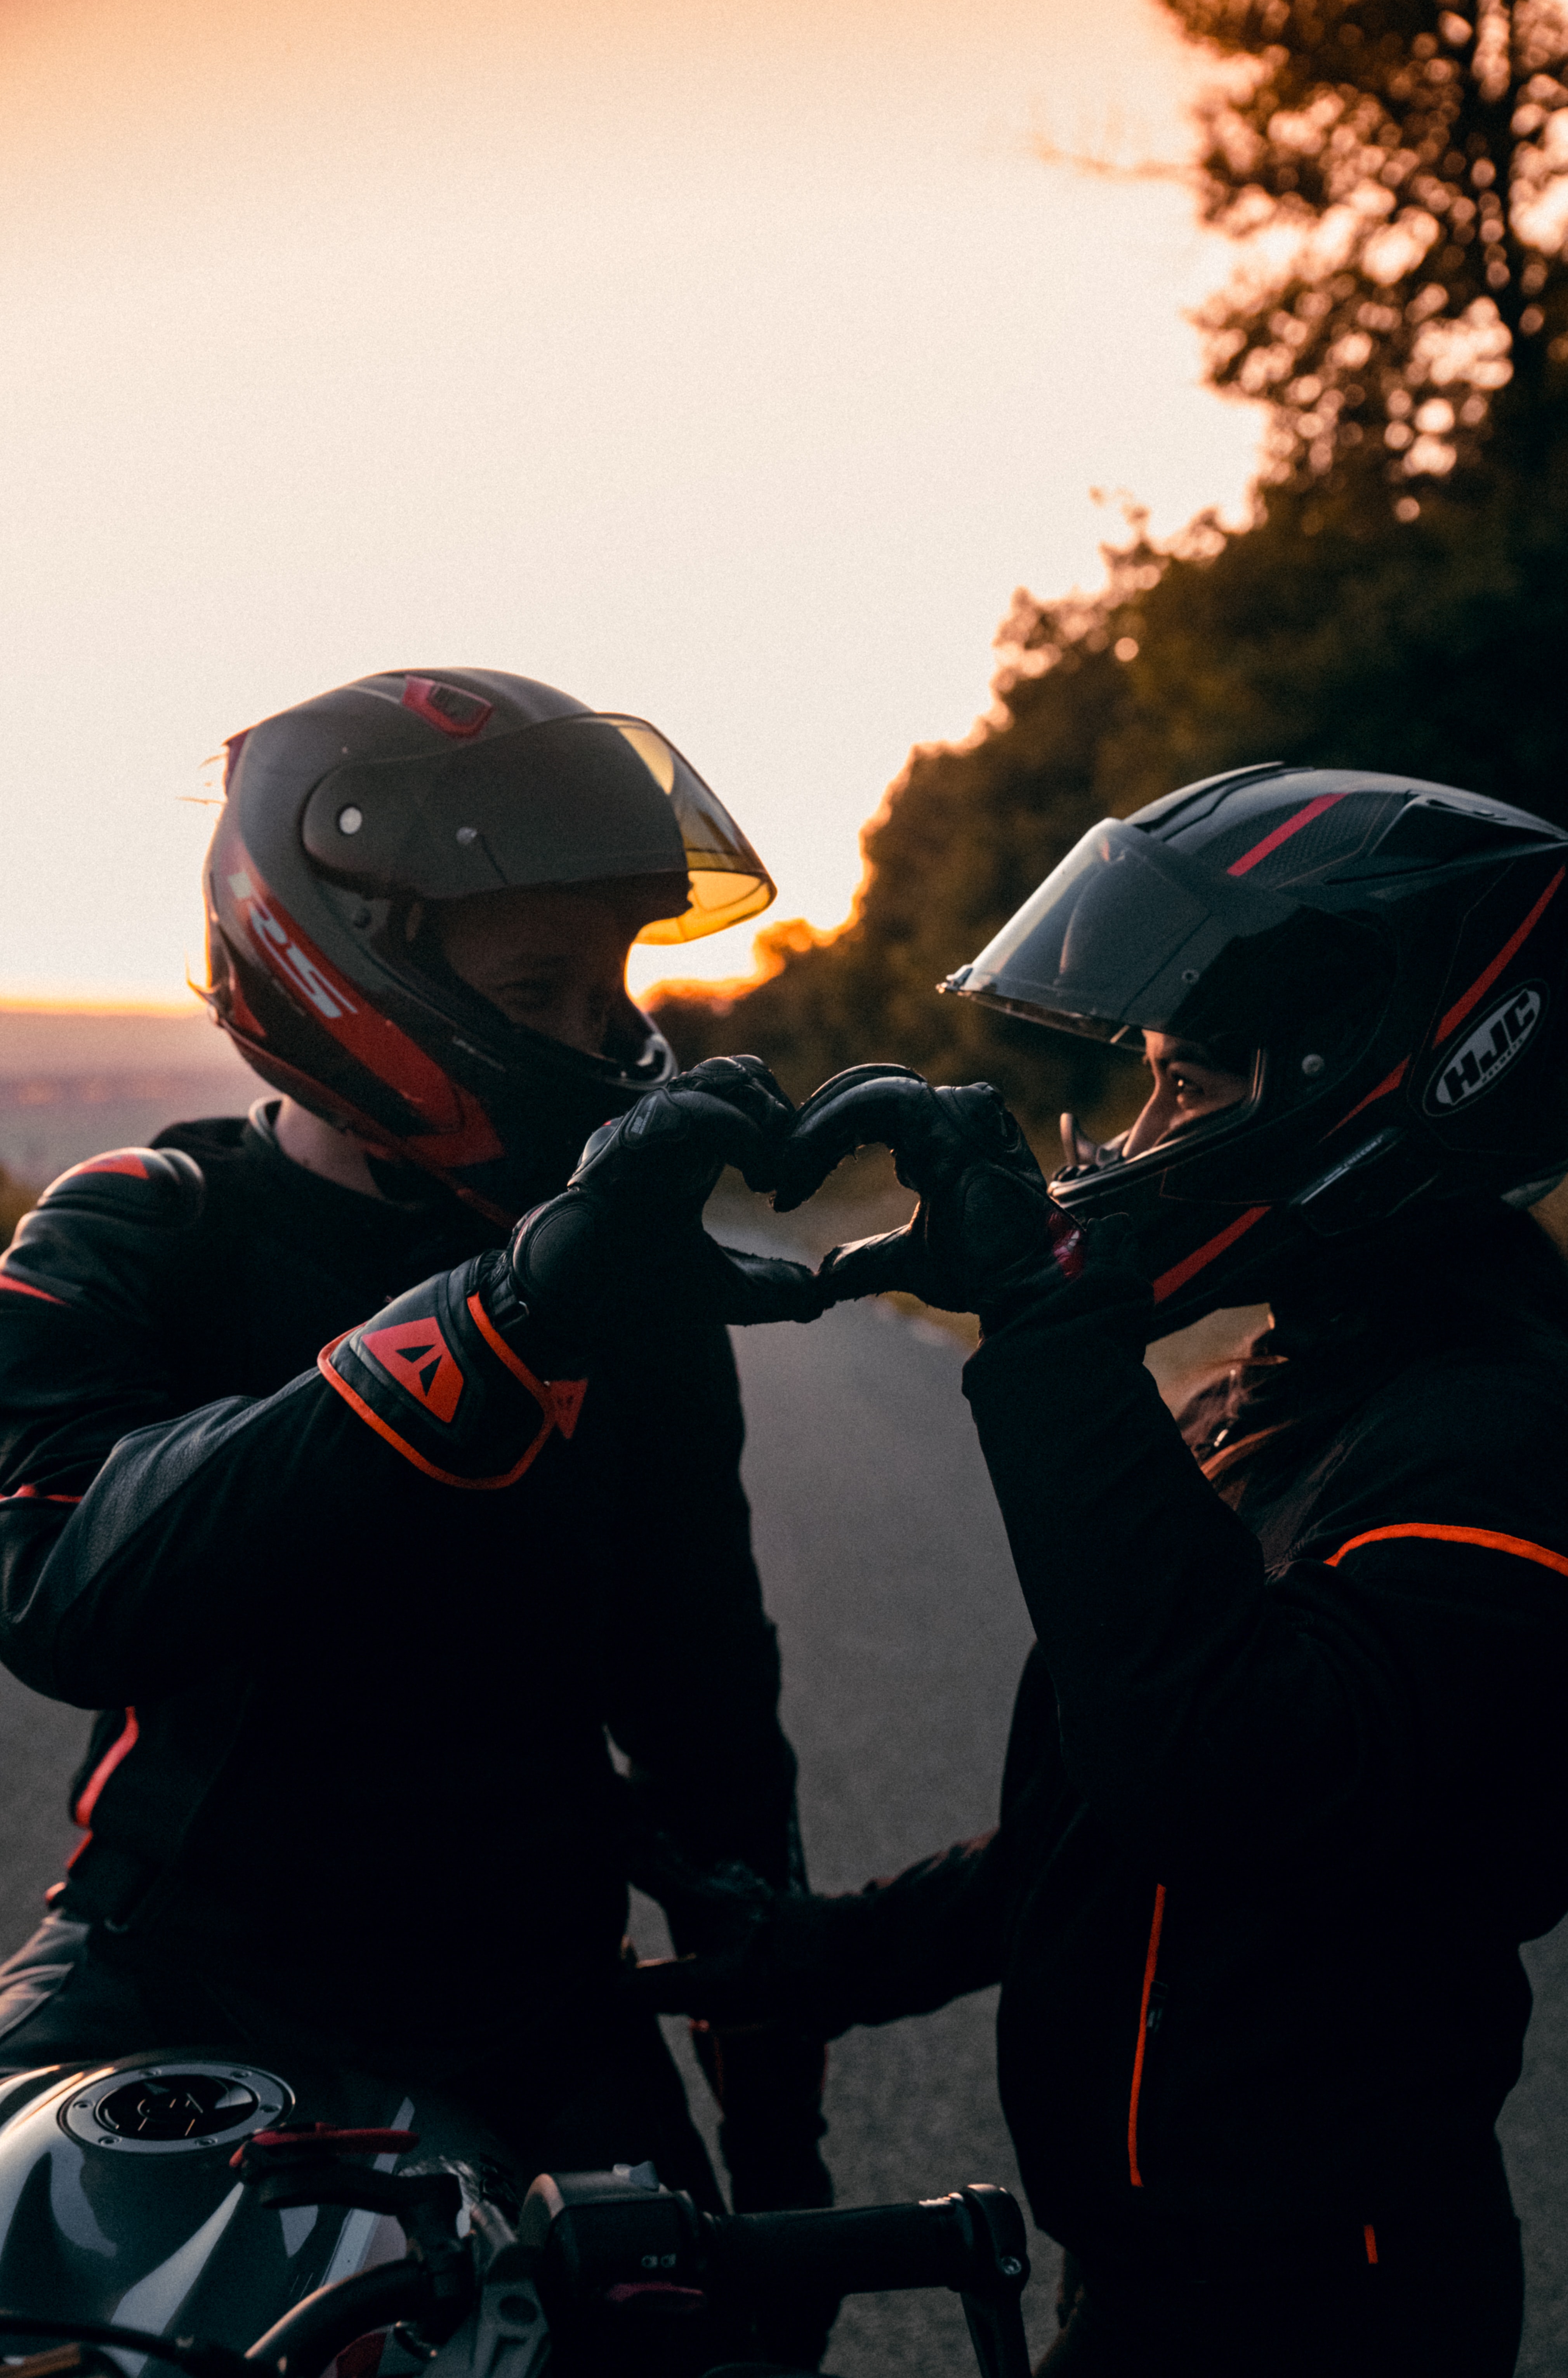 motorcycles, love, helmet, motorcycle, equipment, outfit, motorcyclists